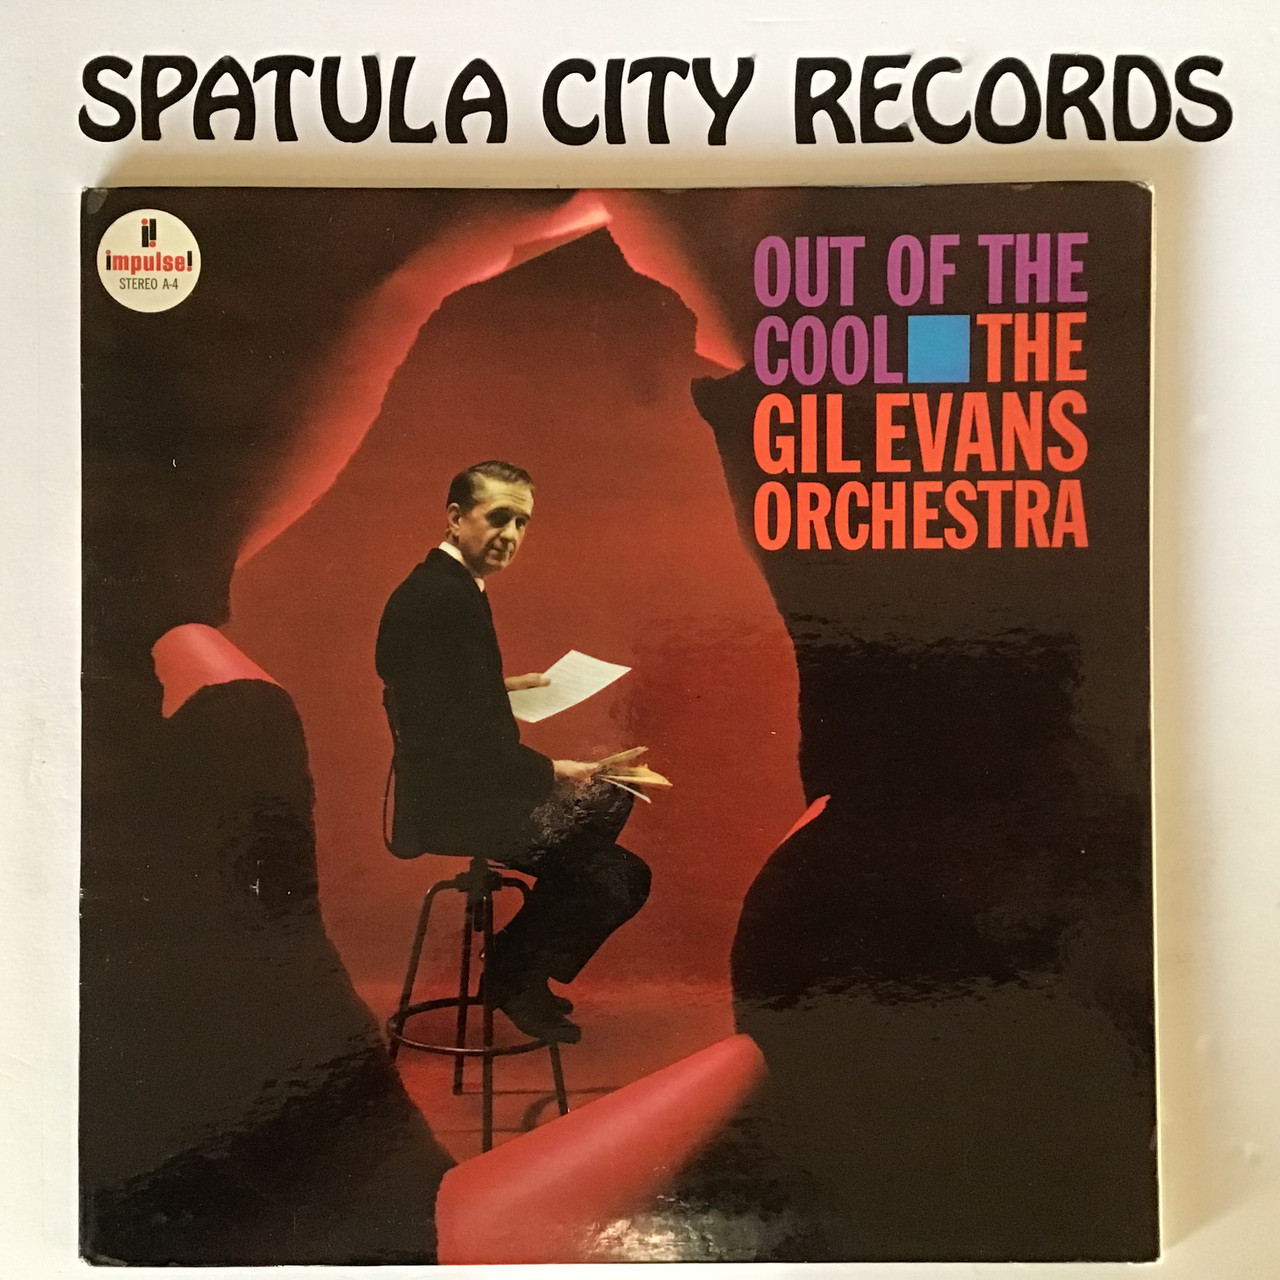 Gil Evans Orchestra, The - Out of The Cool - vinyl record album LP